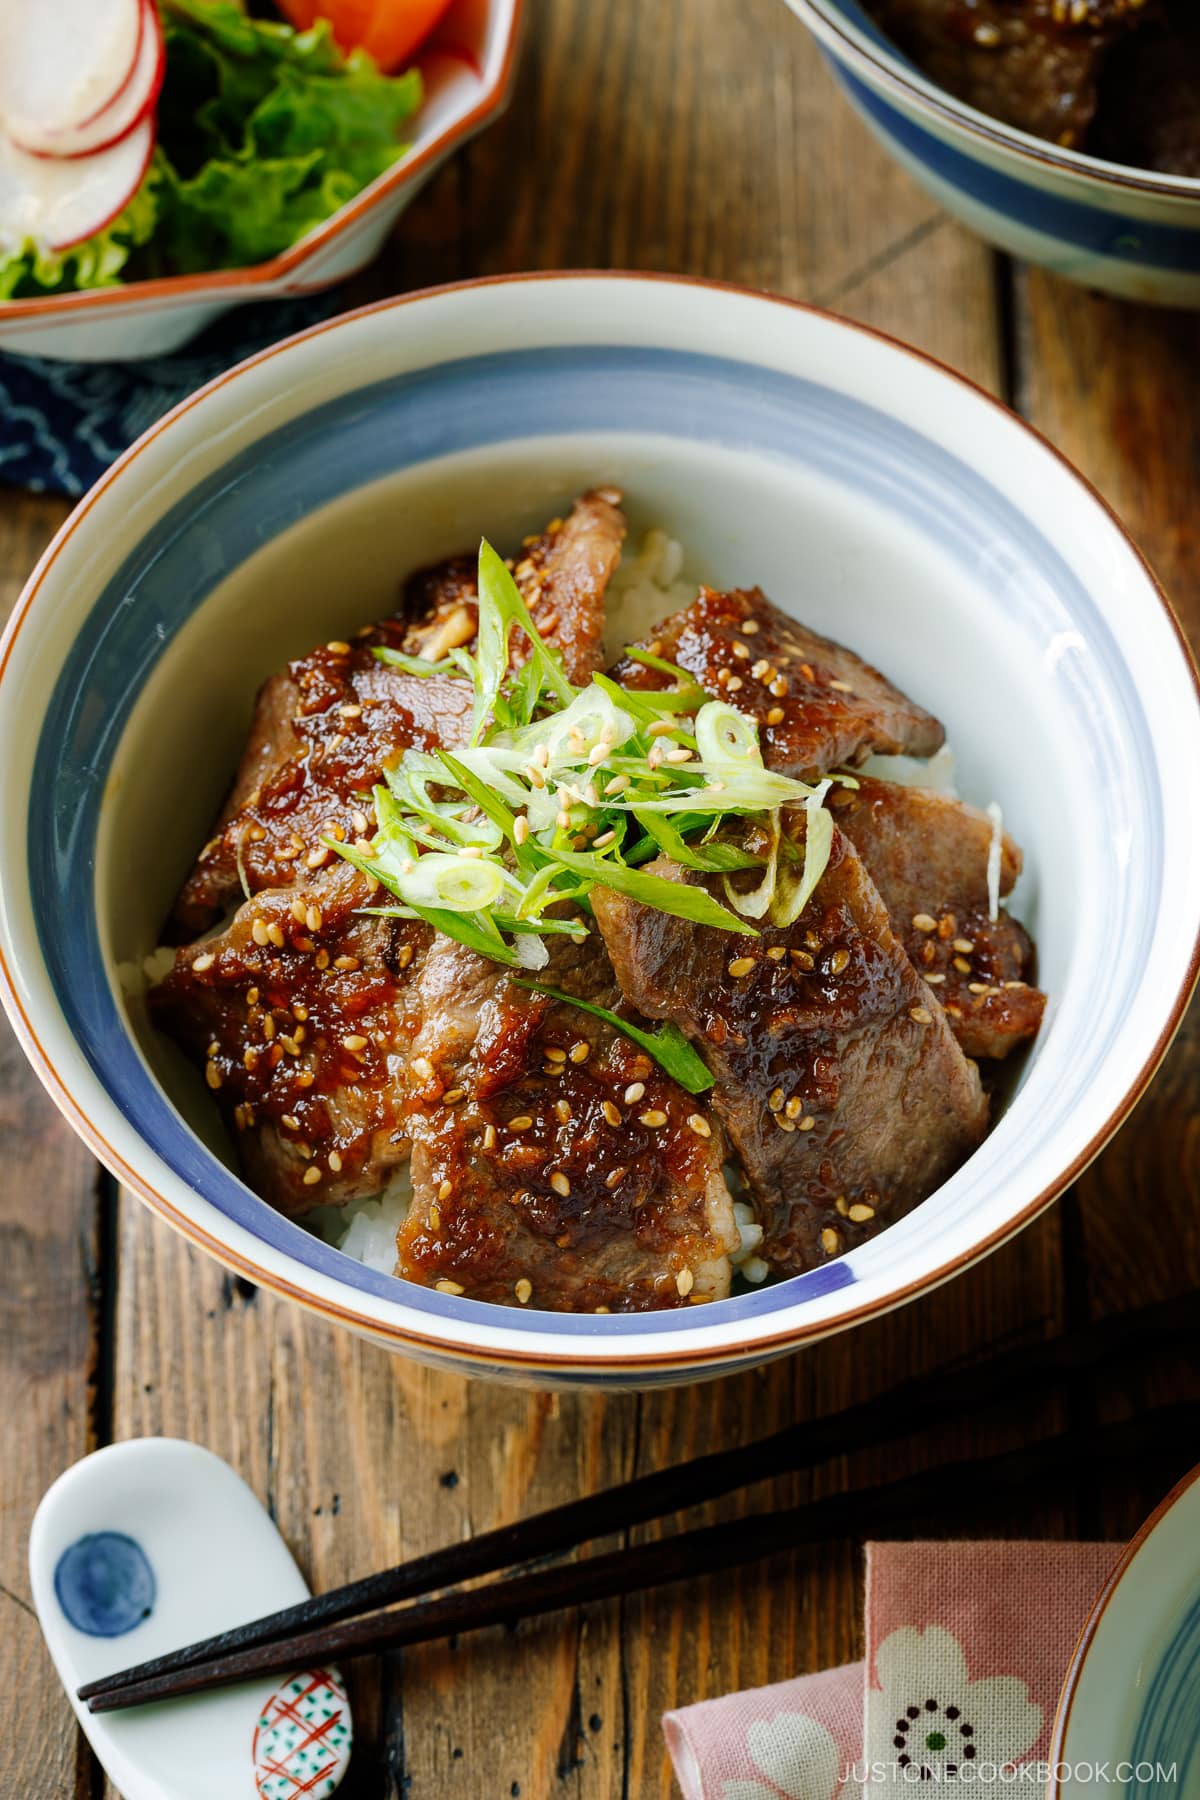 A Japanese donburi bowl containing Yakiniku Don, where pan-grilled well-marbled beef is coated with Japanese BBQ sauce and served over a bed of steamed rice.